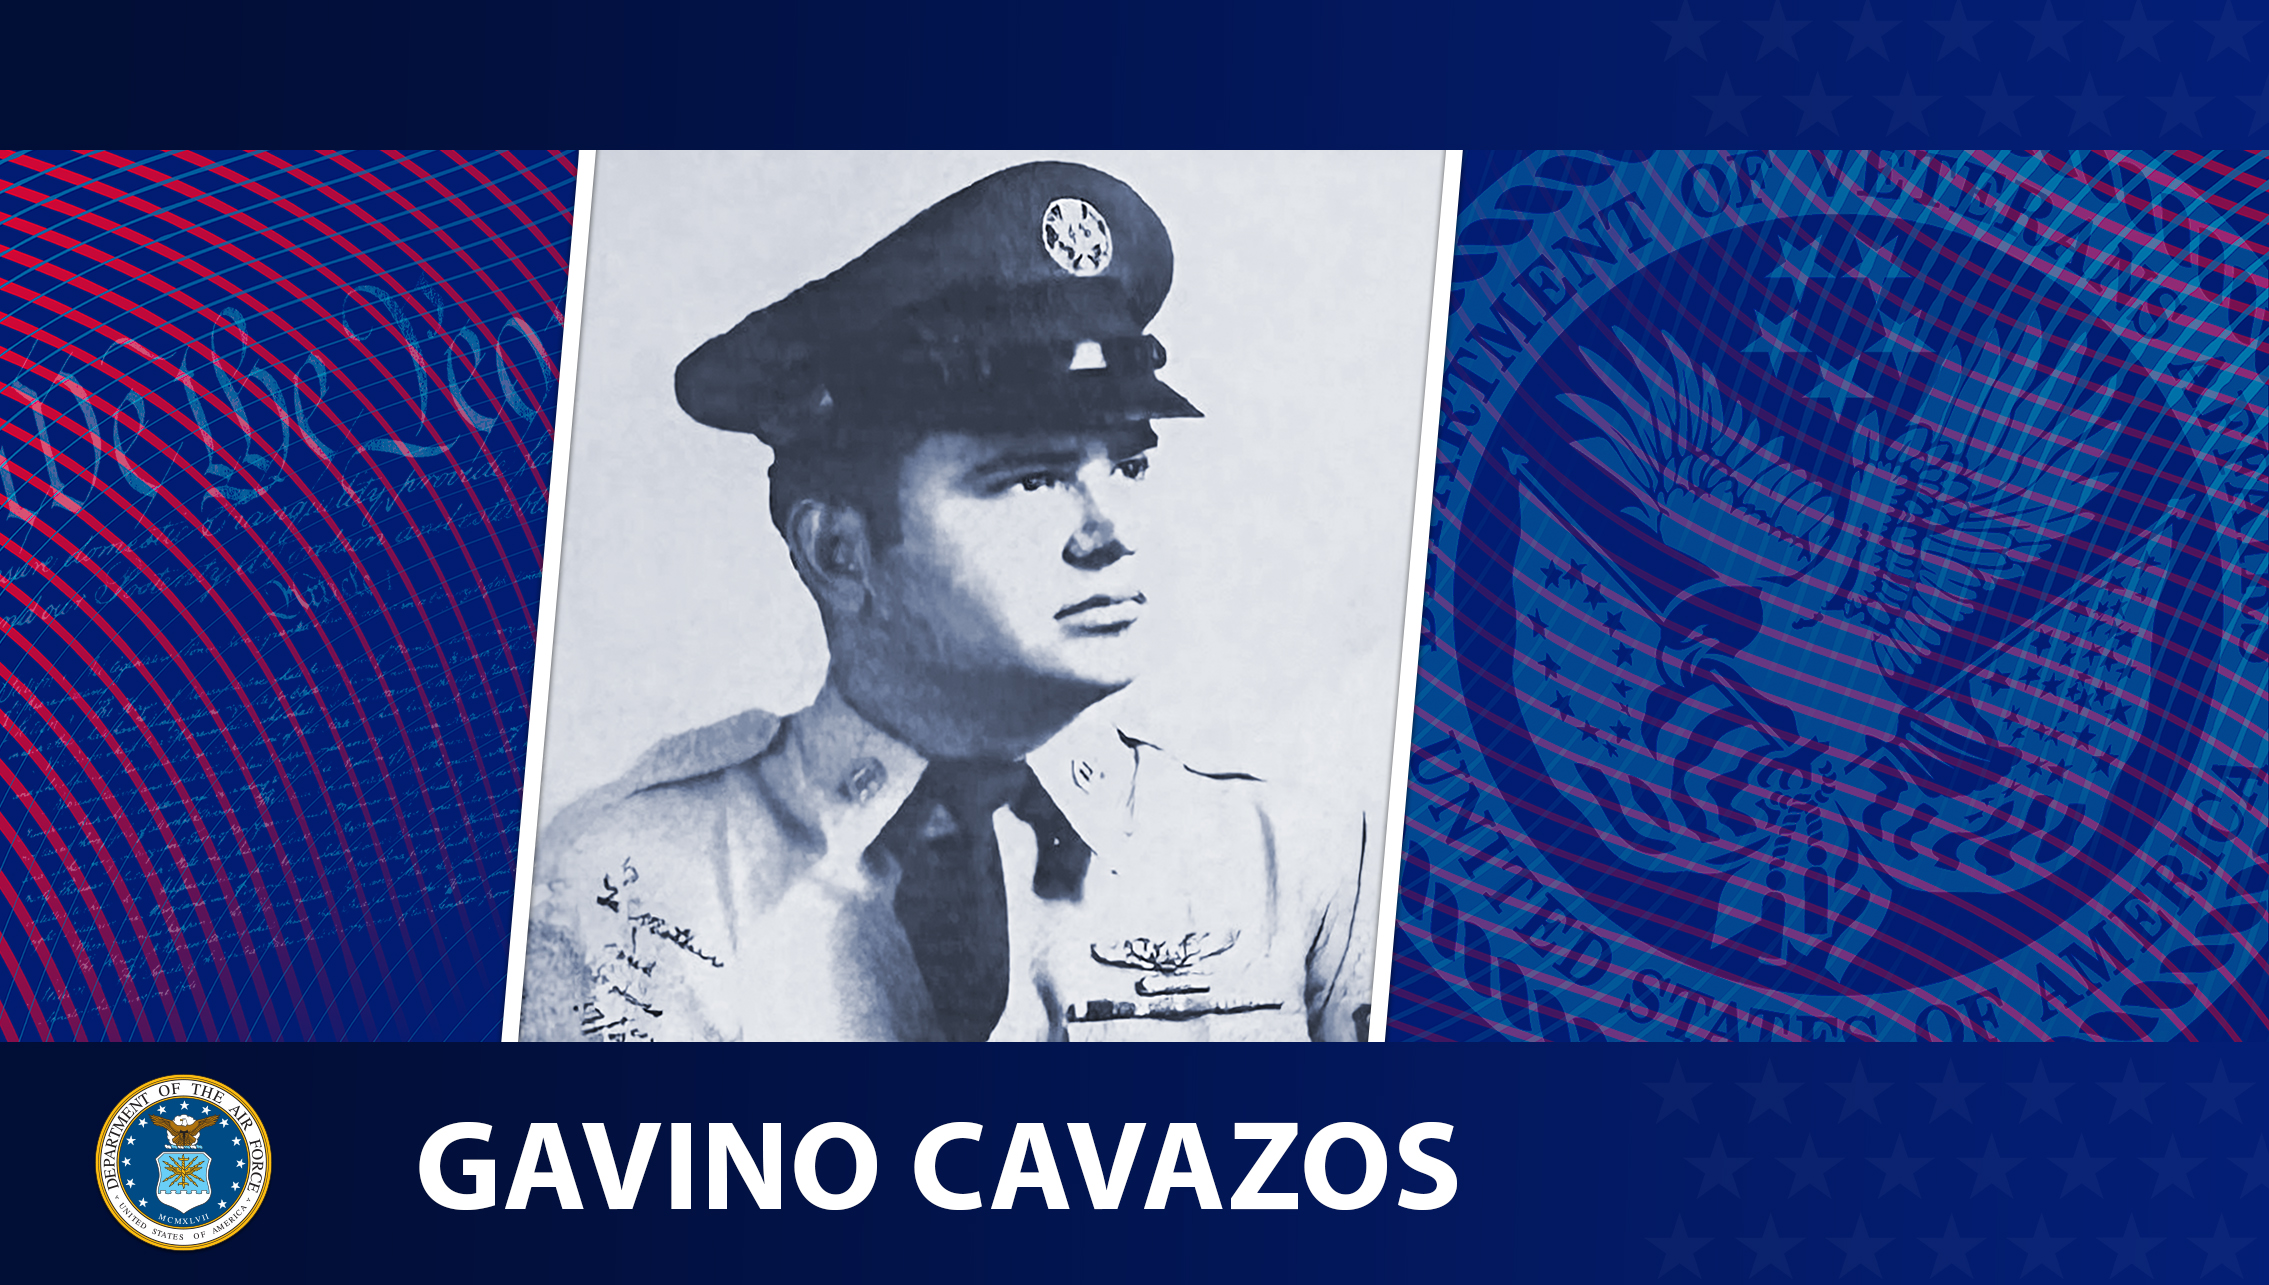 This week’s Honoring Veterans Spotlight honors the service of Air Force Veteran Gavino Cavazos, who served from 1949 to 1973 during both the Korean and Vietnam Wars.